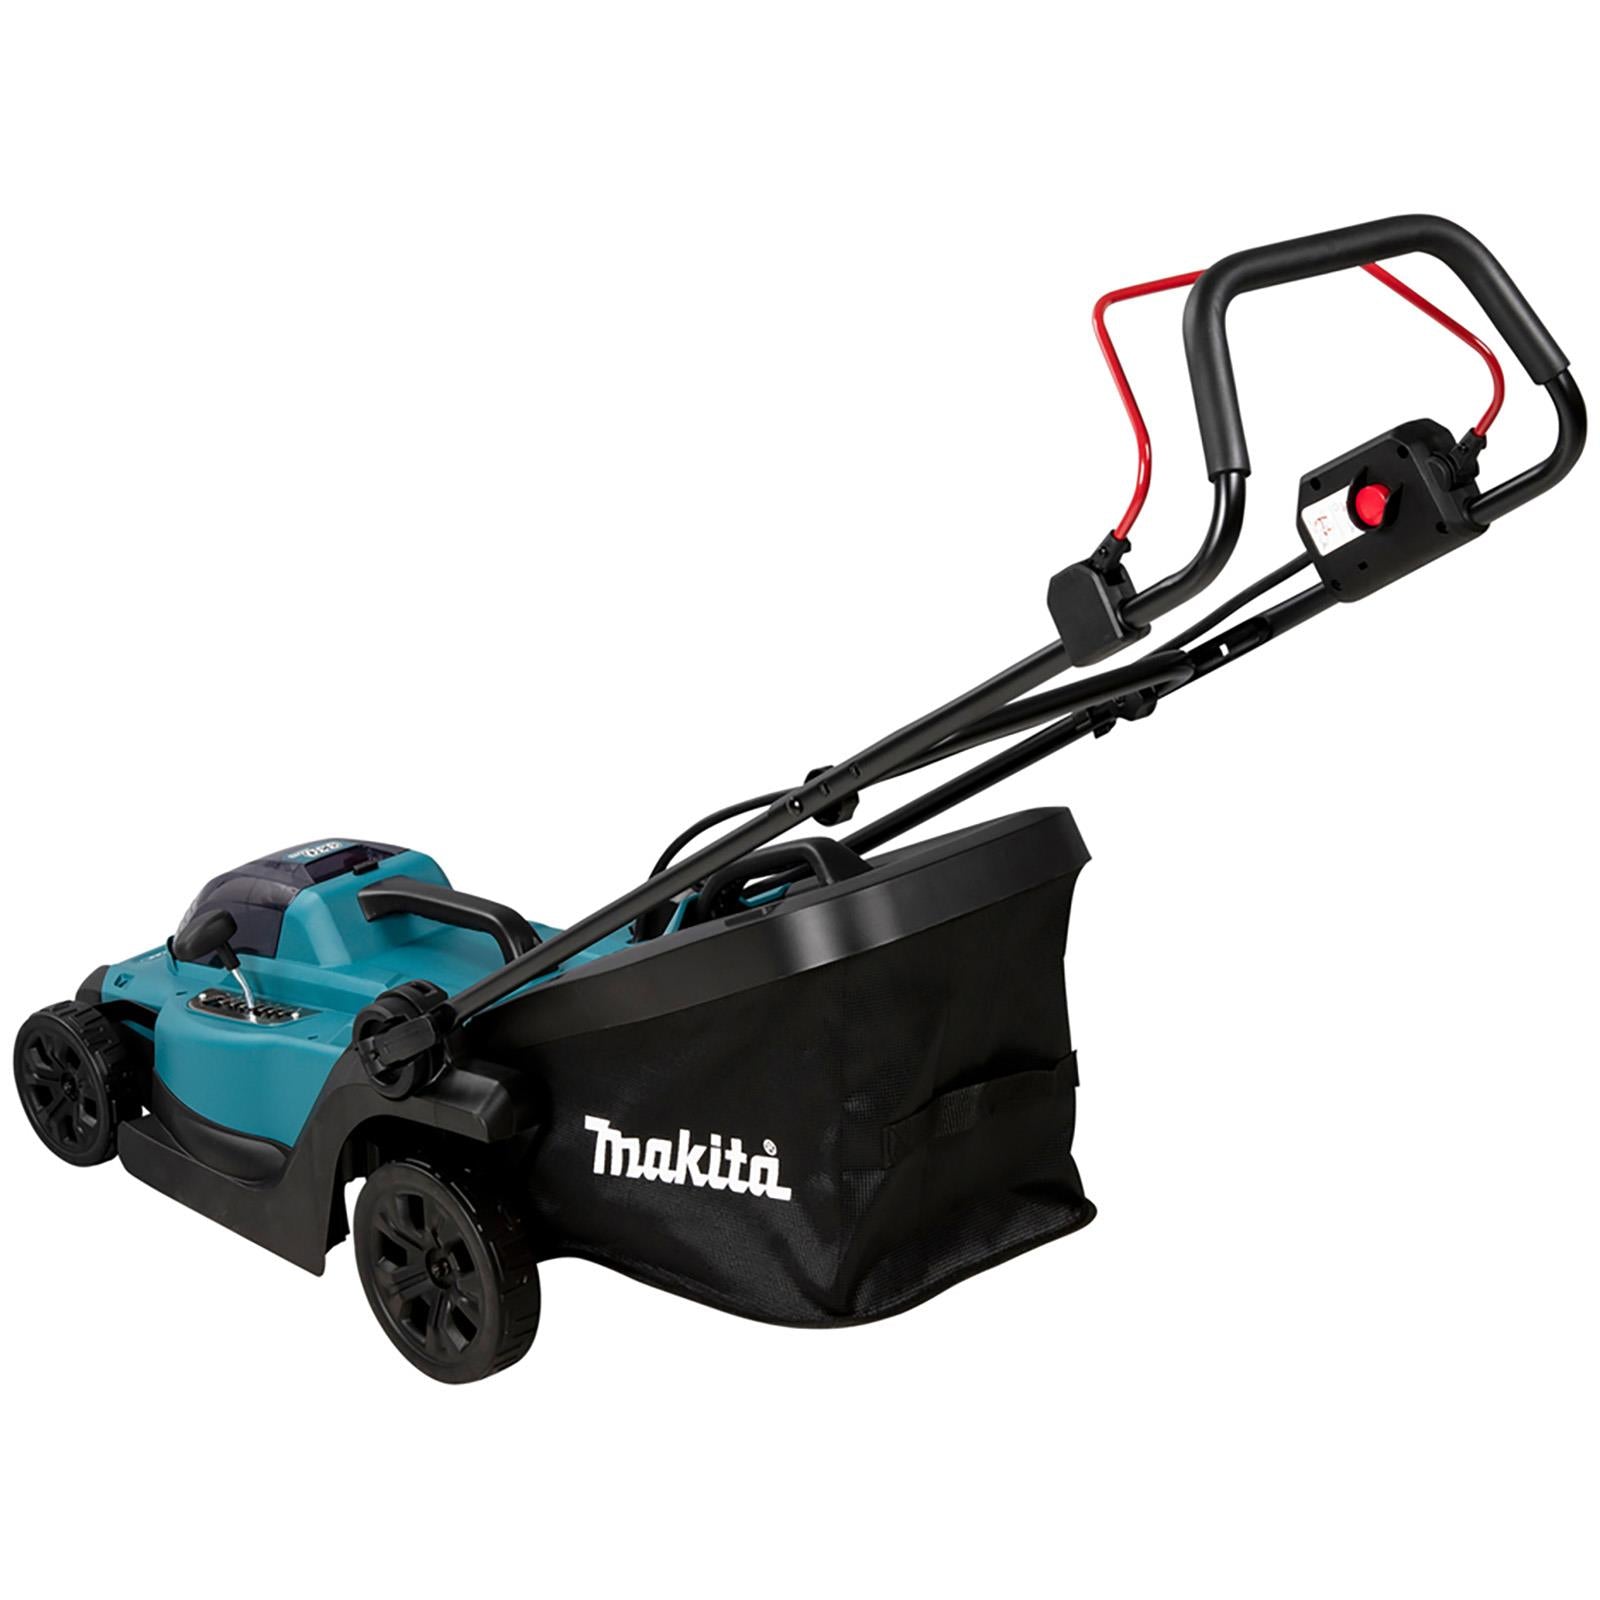 Makita 33cm Lawn Mower Kit 18V LXT Li-ion Cordless Garden Grass Outdoor 5Ah Battery and Charger DLM330RT